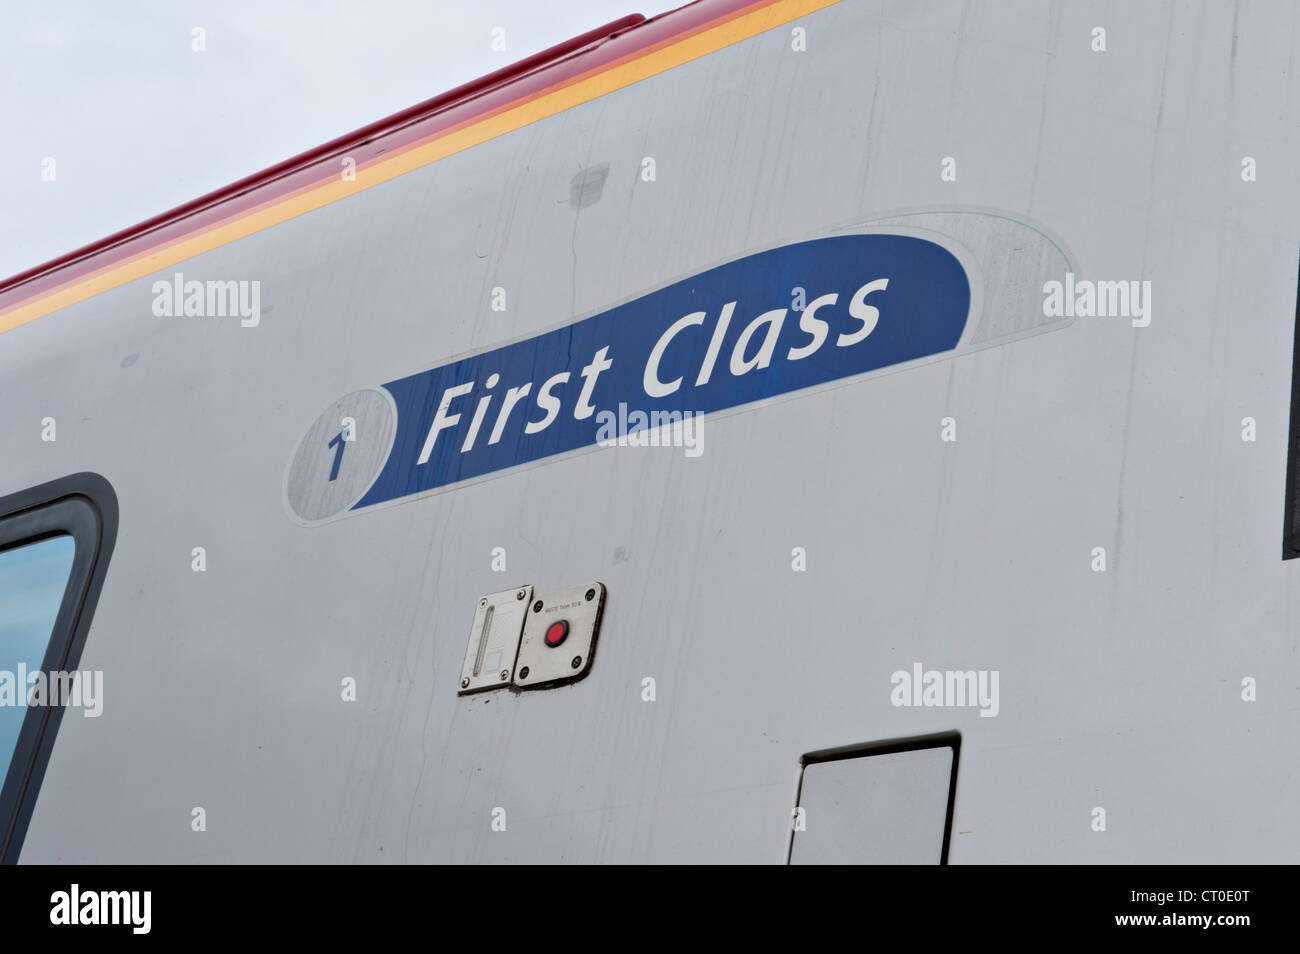 First Class sign on the side of a railway carriage Stock Photo